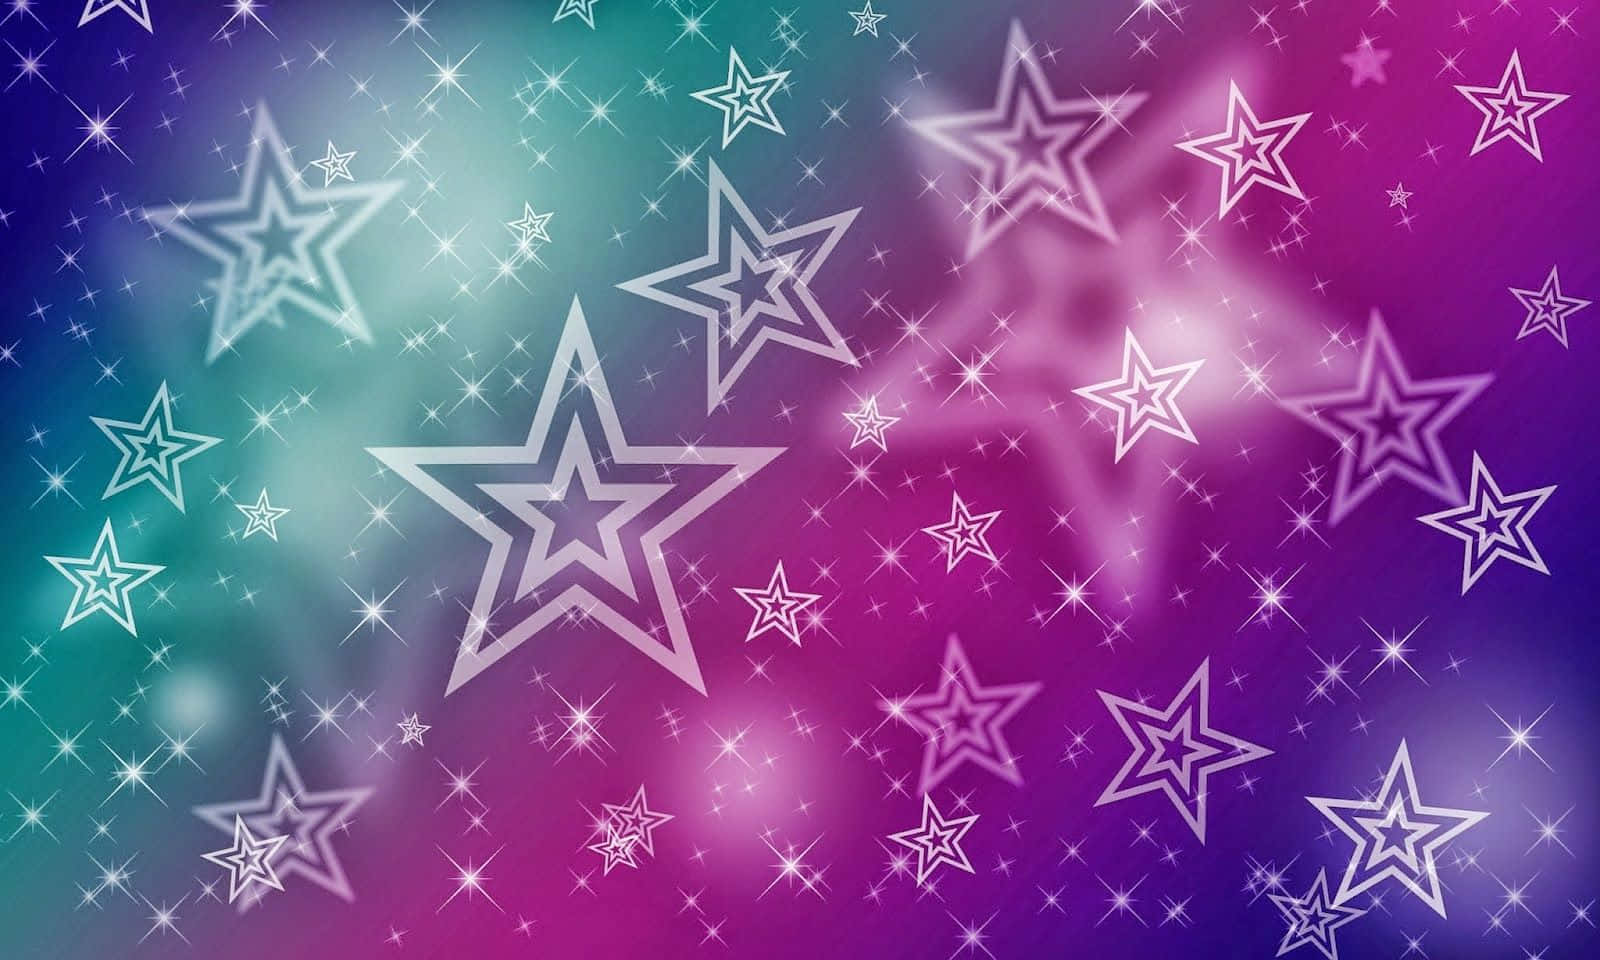 Make A Wish Upon This Aesthetic Star Background